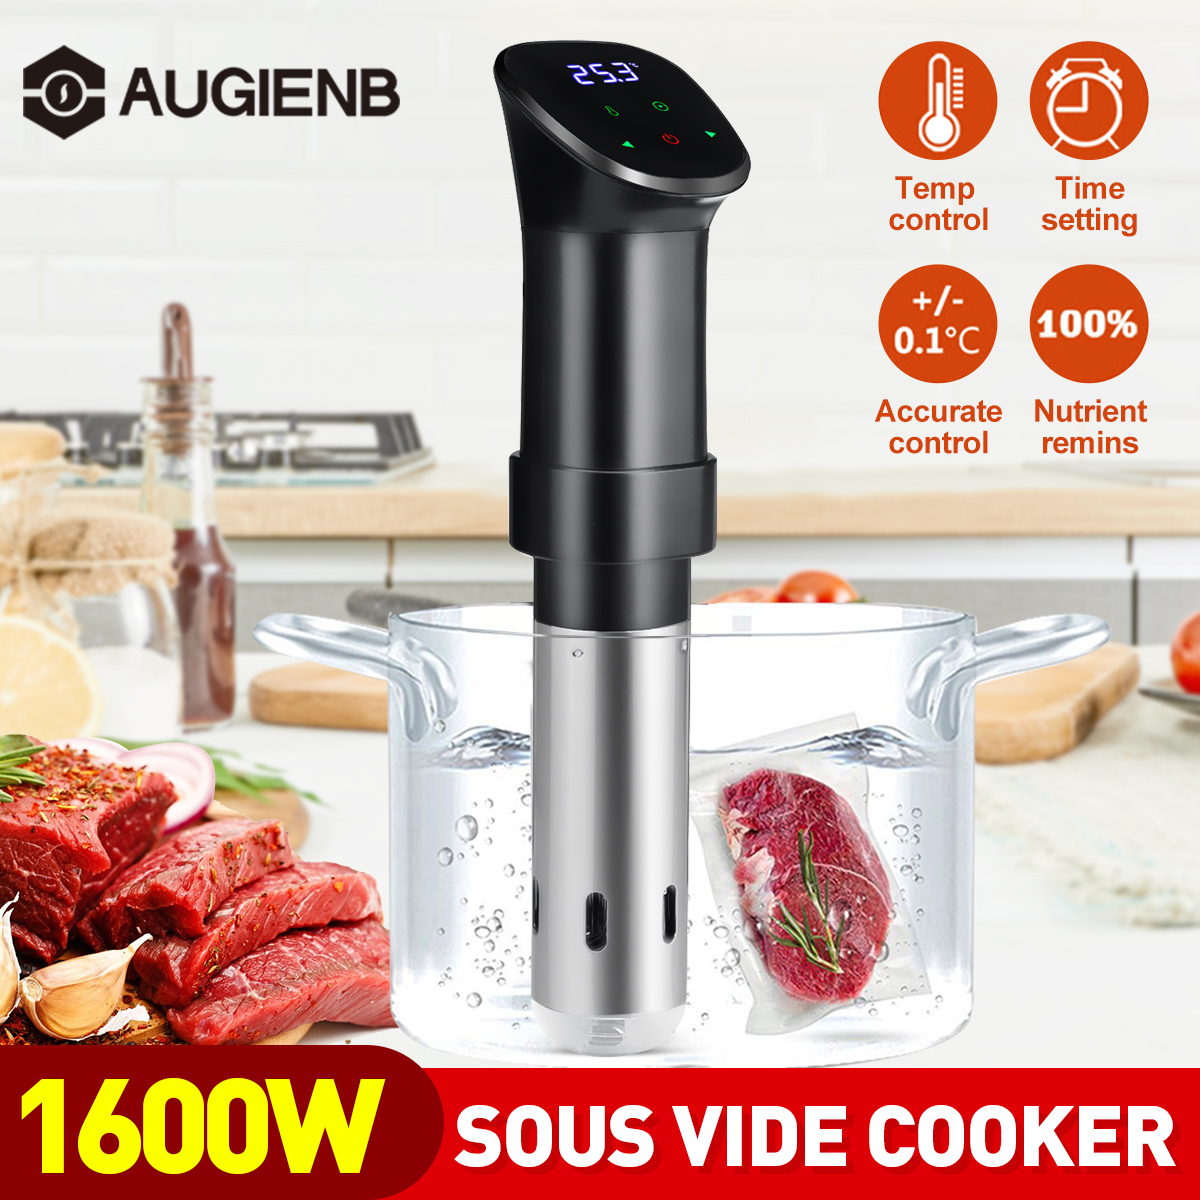 AUGIENB-SC-003-1600W-LCD-Touch-Sous-Vide-Cooker-Waterproof-Sous-Vide-Immersion-Circulator-Vacuum-Hea-1936799-1